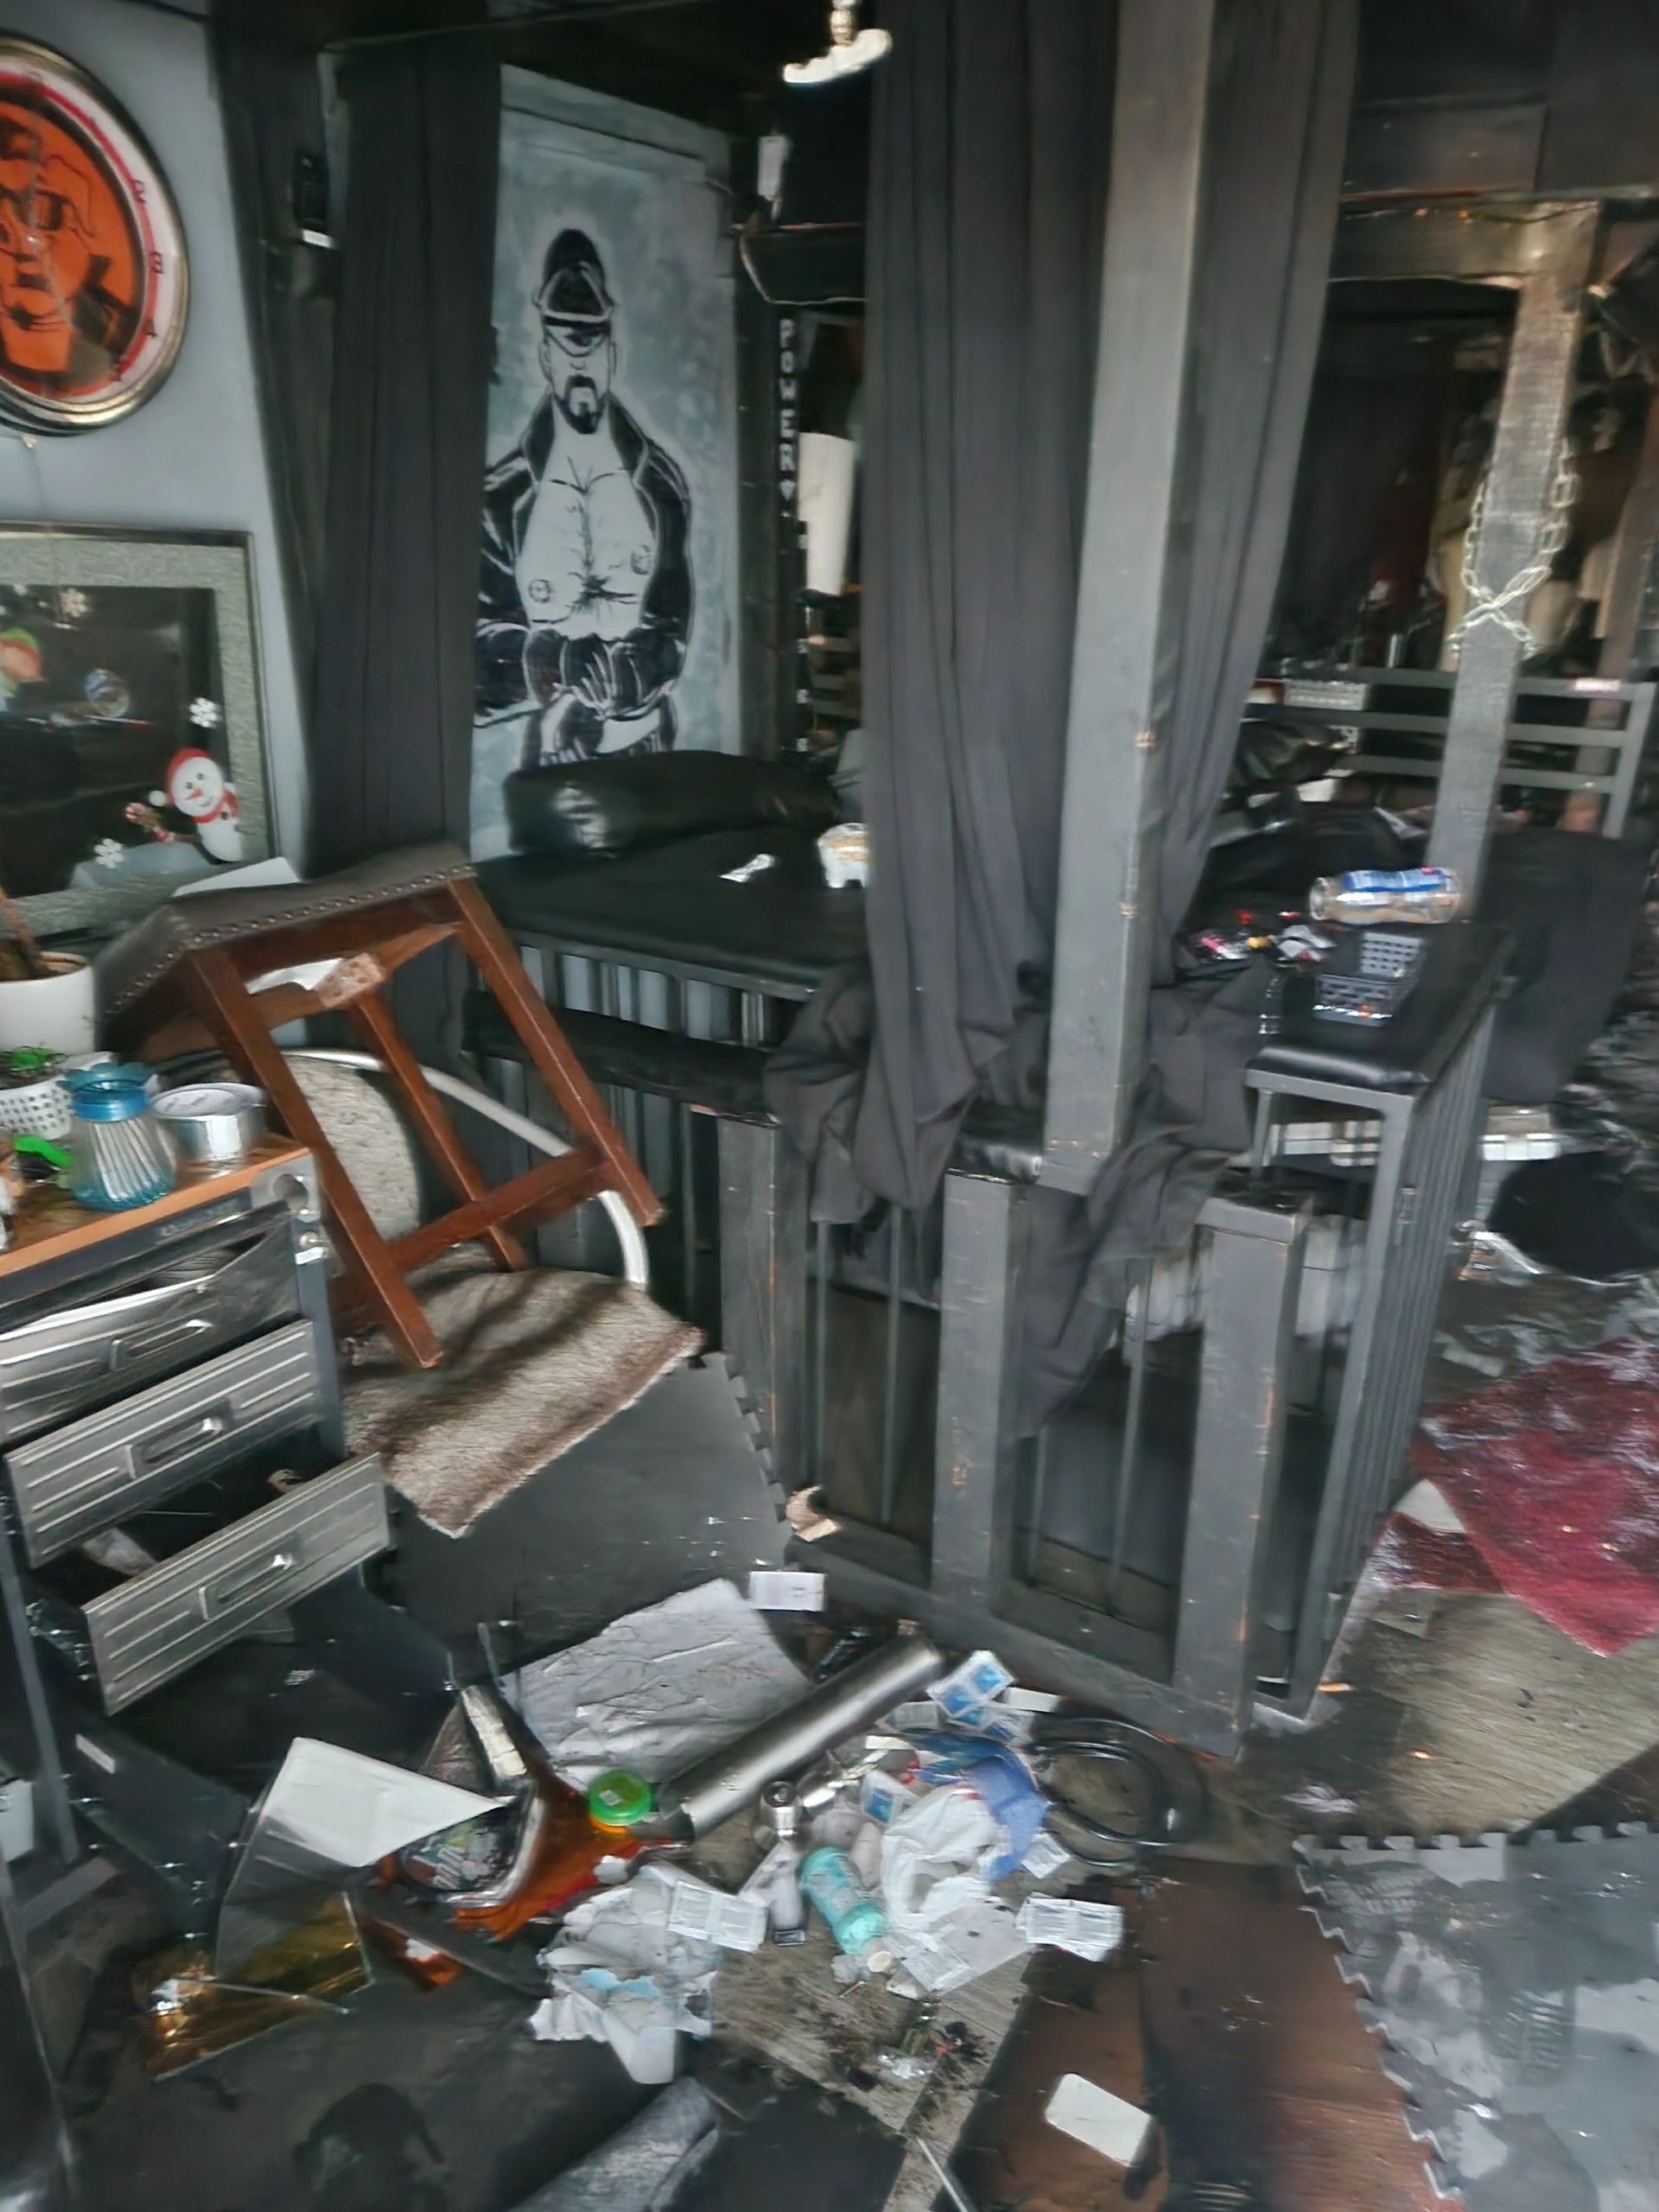 After the fire destroyed everything, looters came and stole anything they could. 